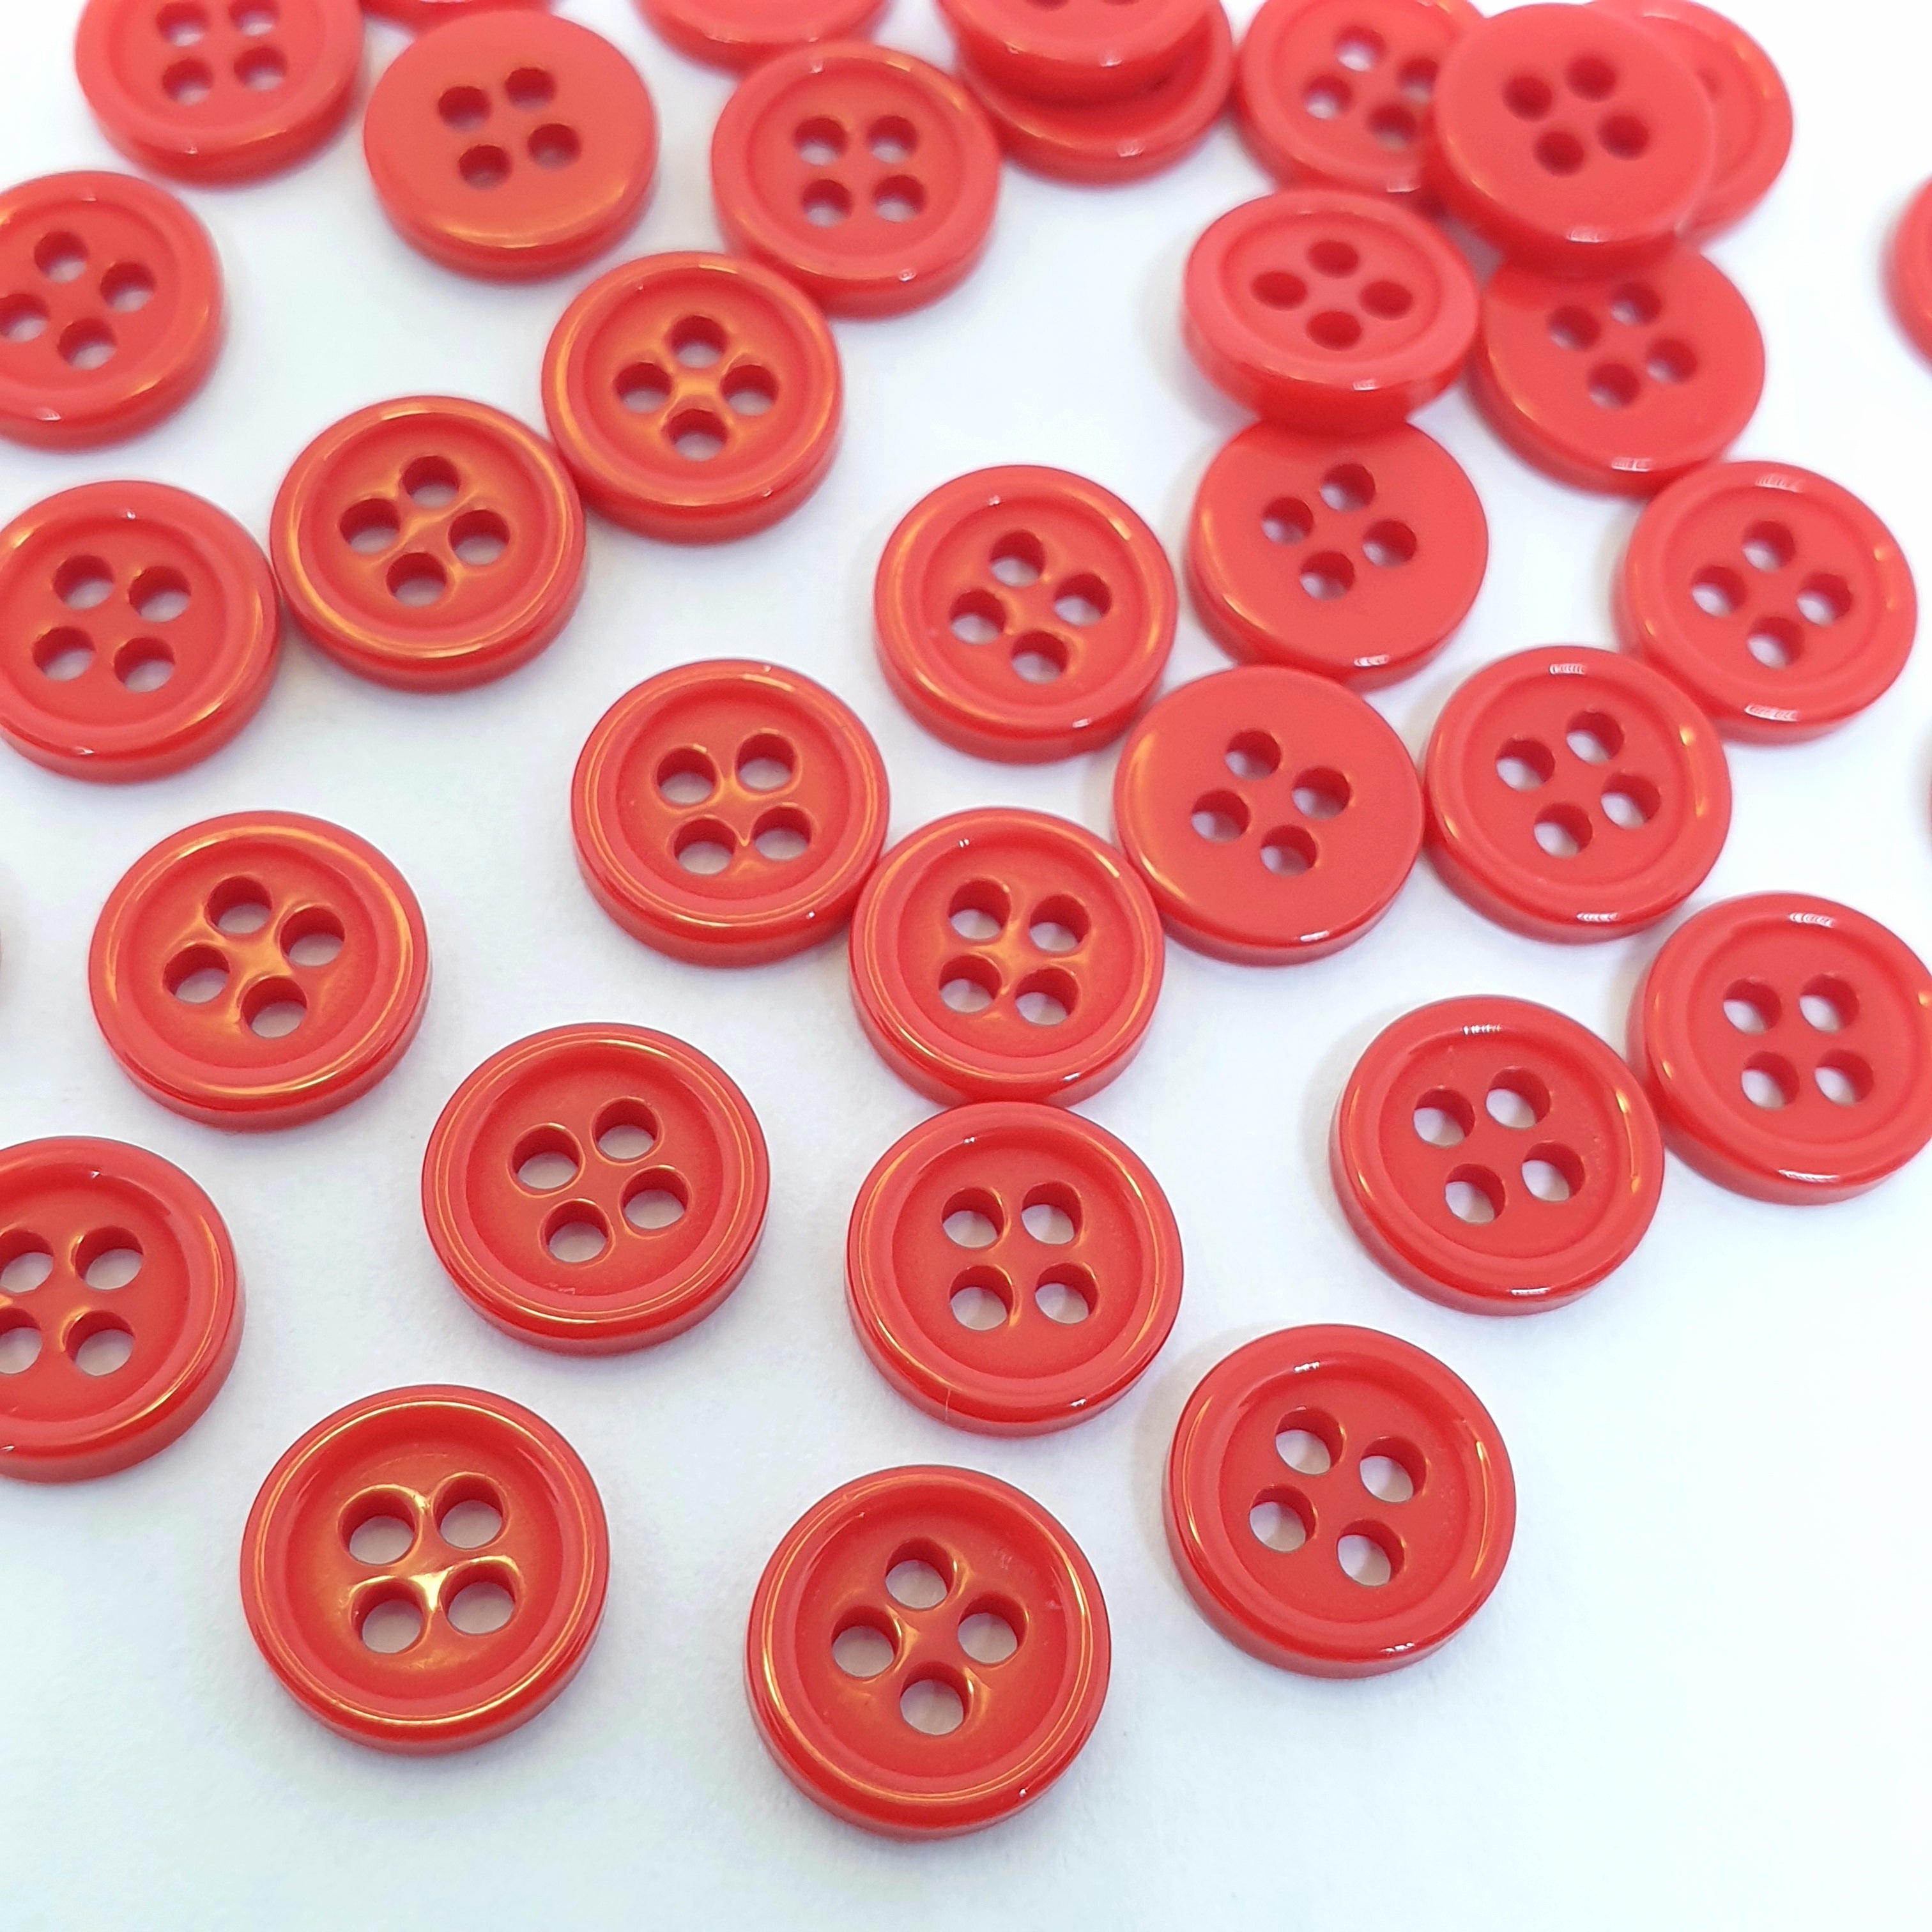 MajorCrafts 120pcs 9mm Red 4 Holes Small Round Resin Sewing Buttons